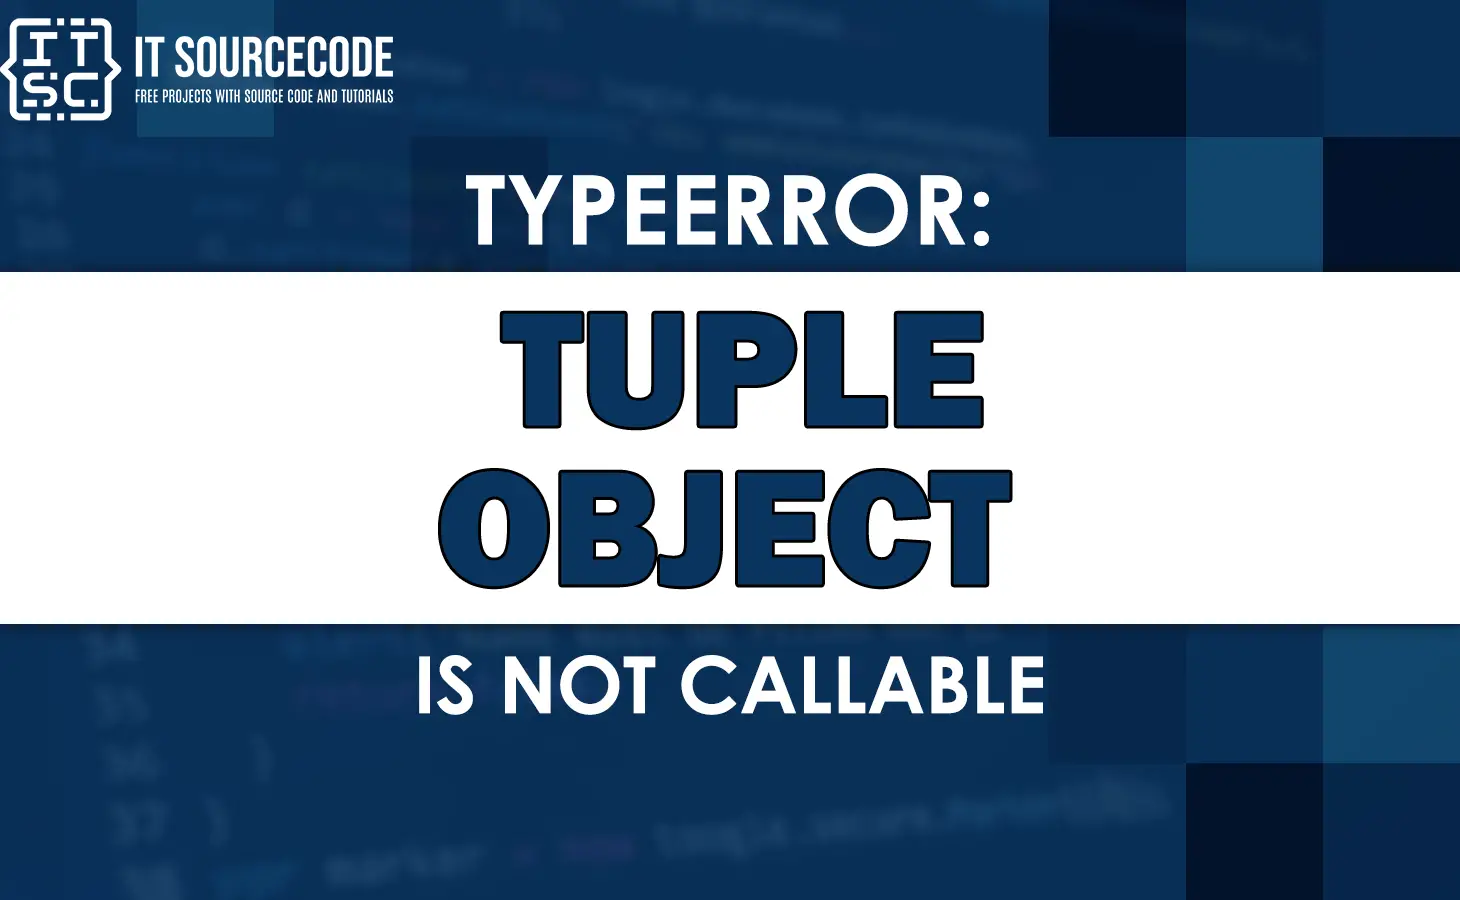 Typeerror: 'Tuple' Object Is Not Callable [Solved]